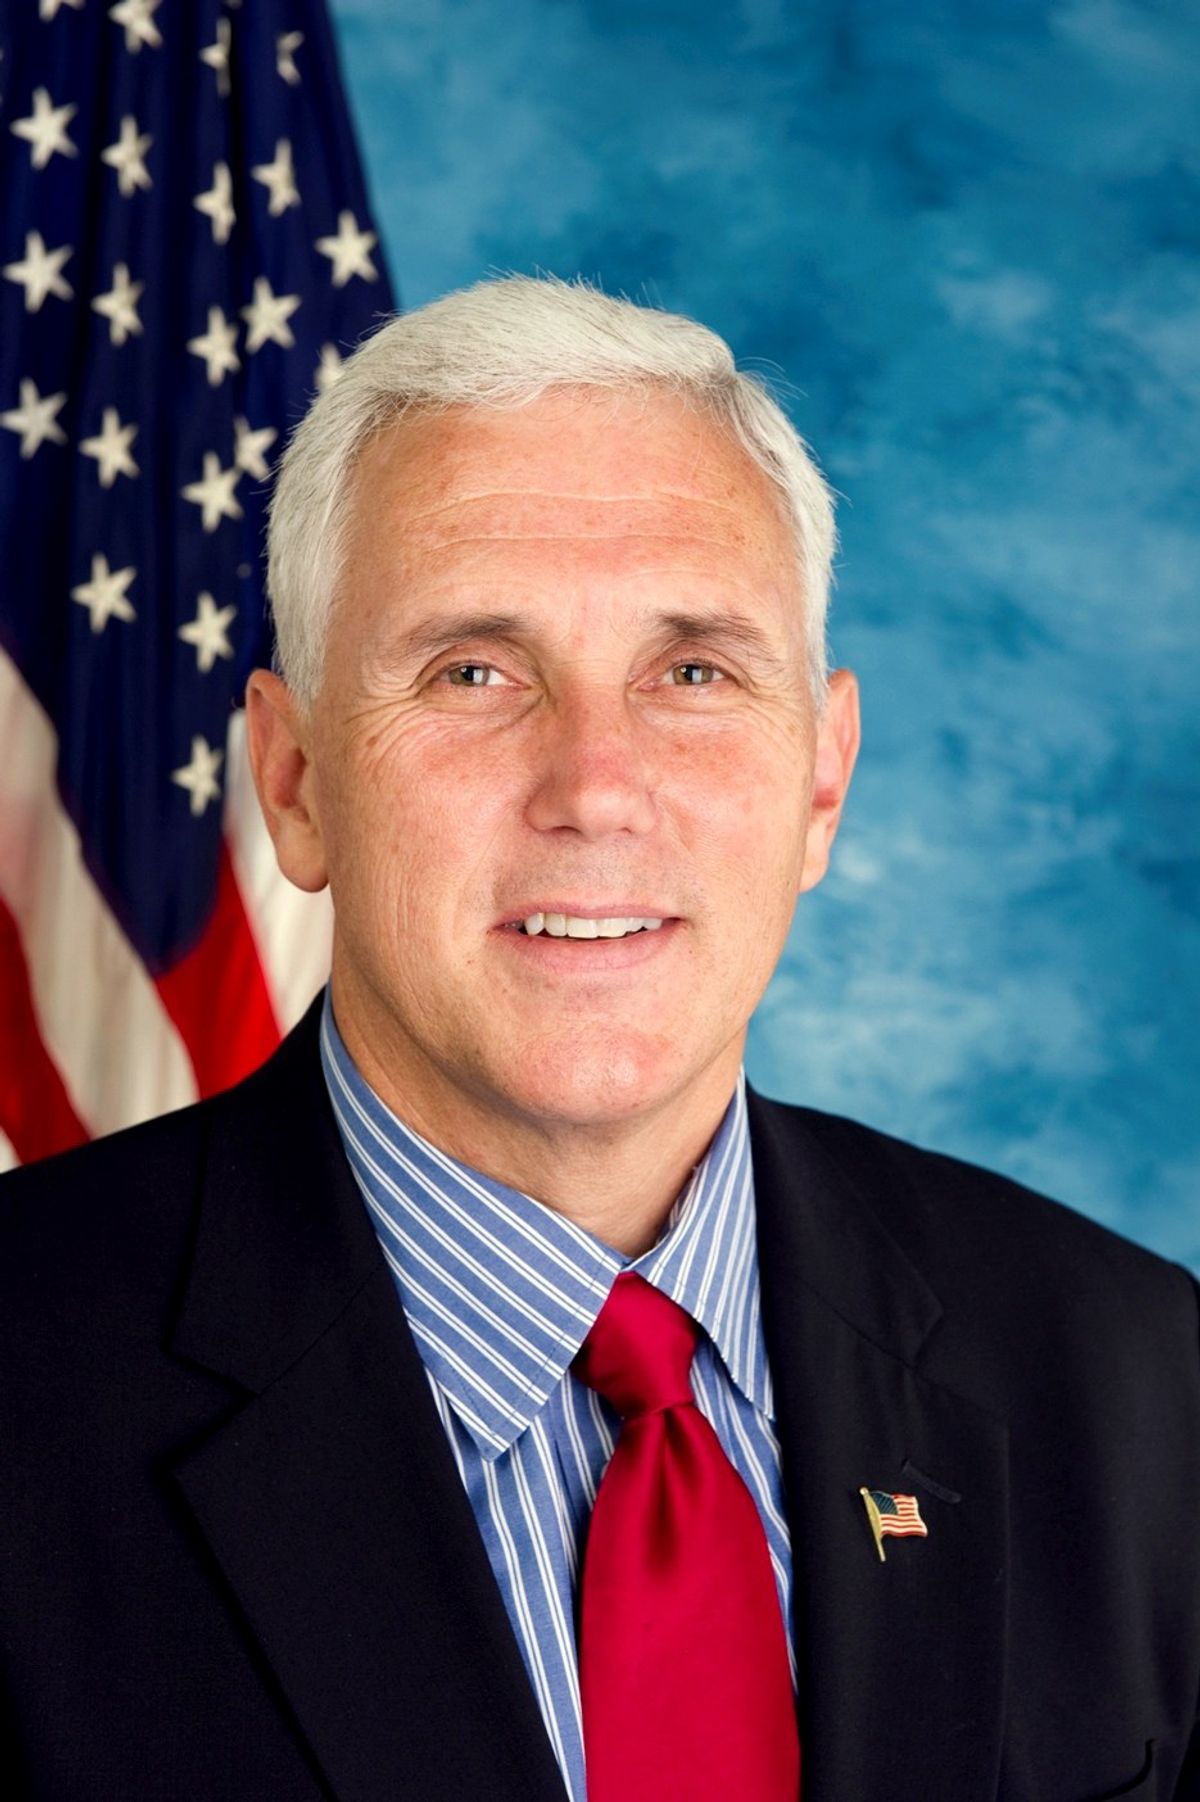 Governor Mike Pence's Record